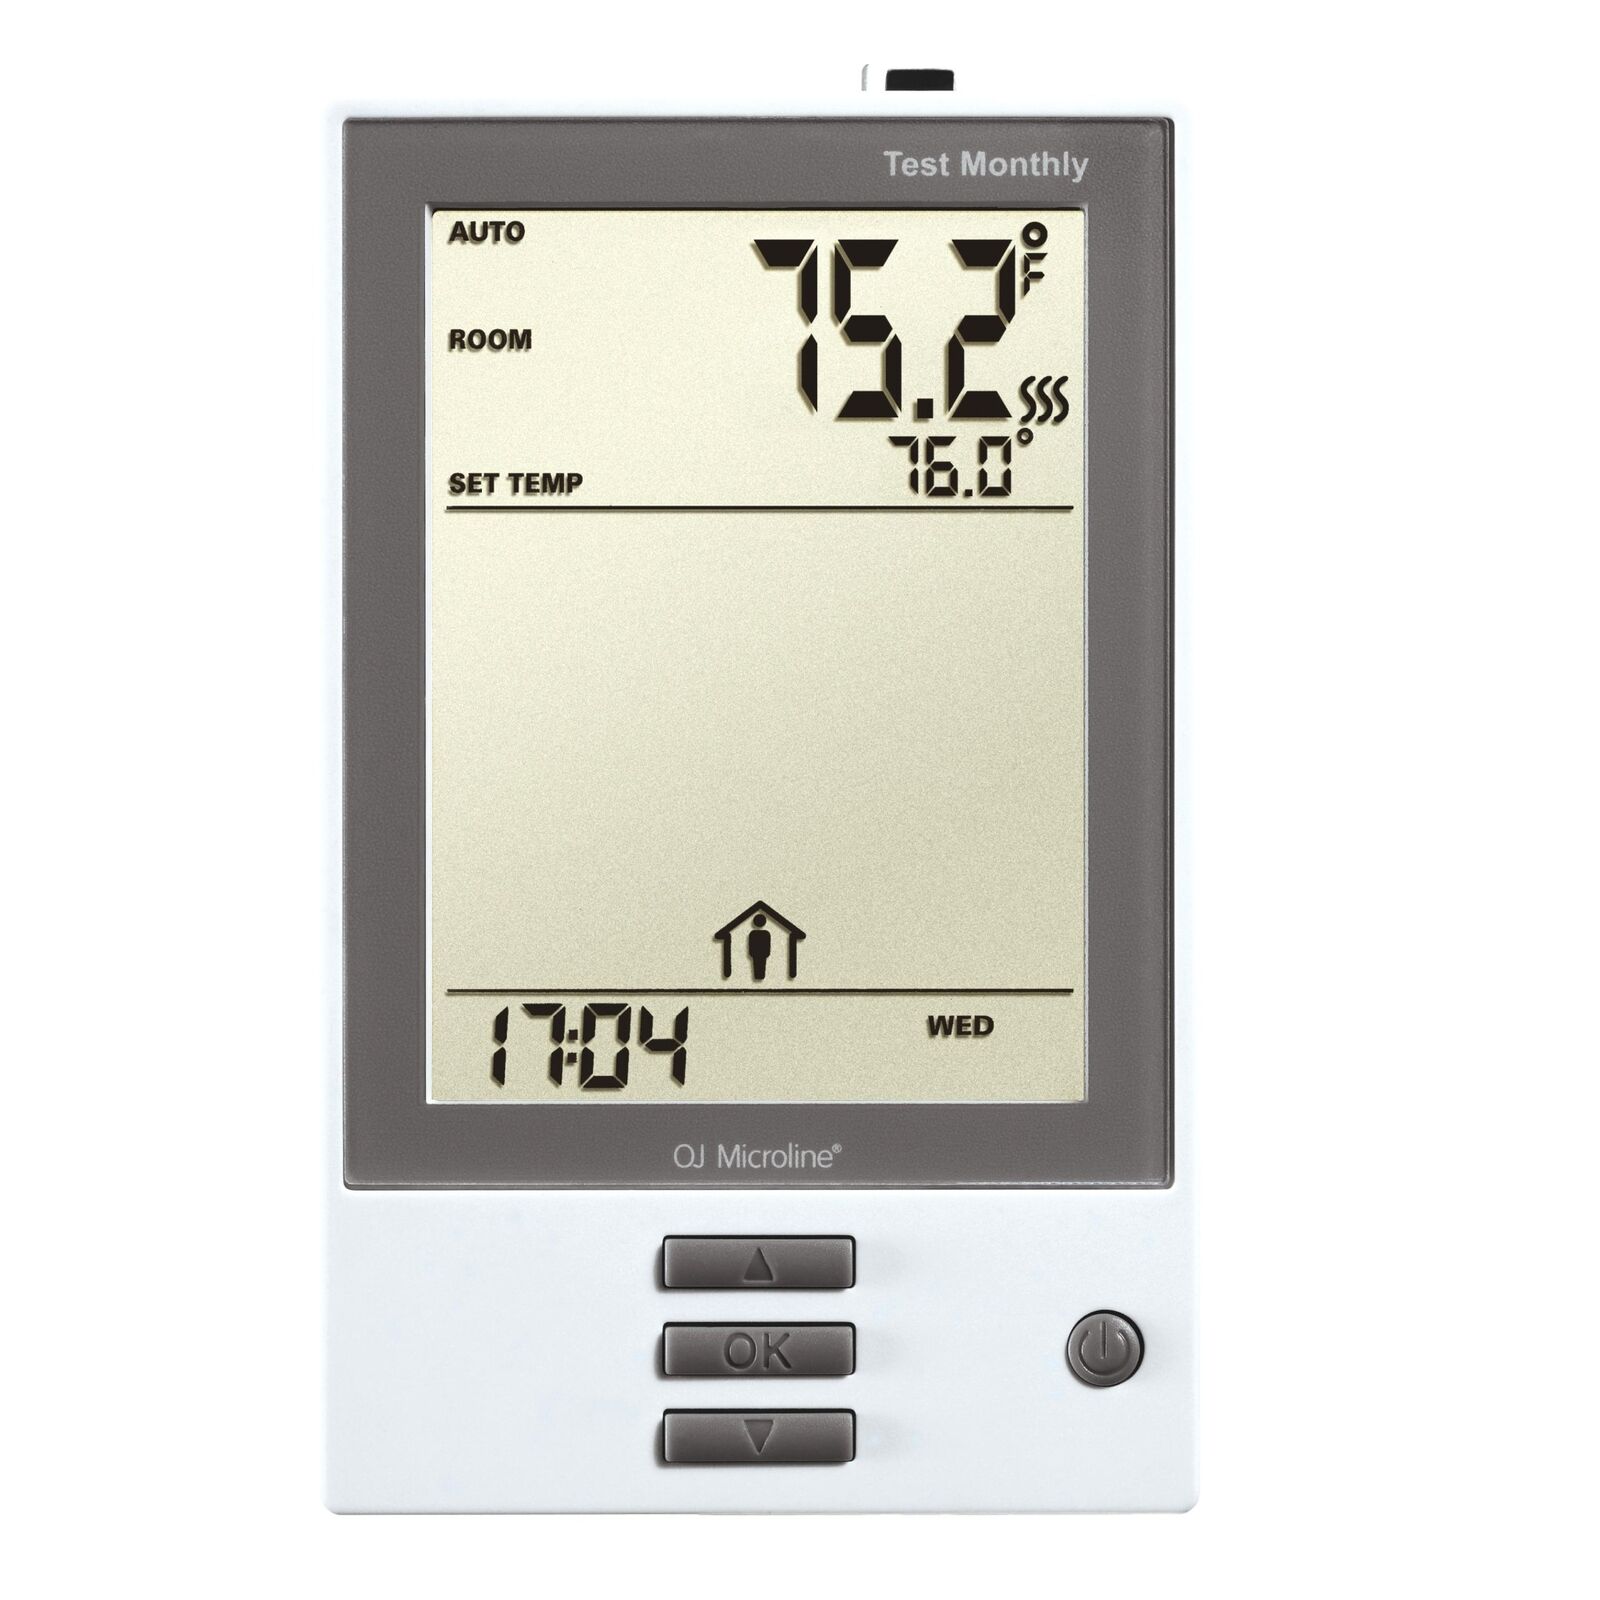 OJ Microline UDG-4999 Programmable Floor Heating Thermostat with Class A GFCI